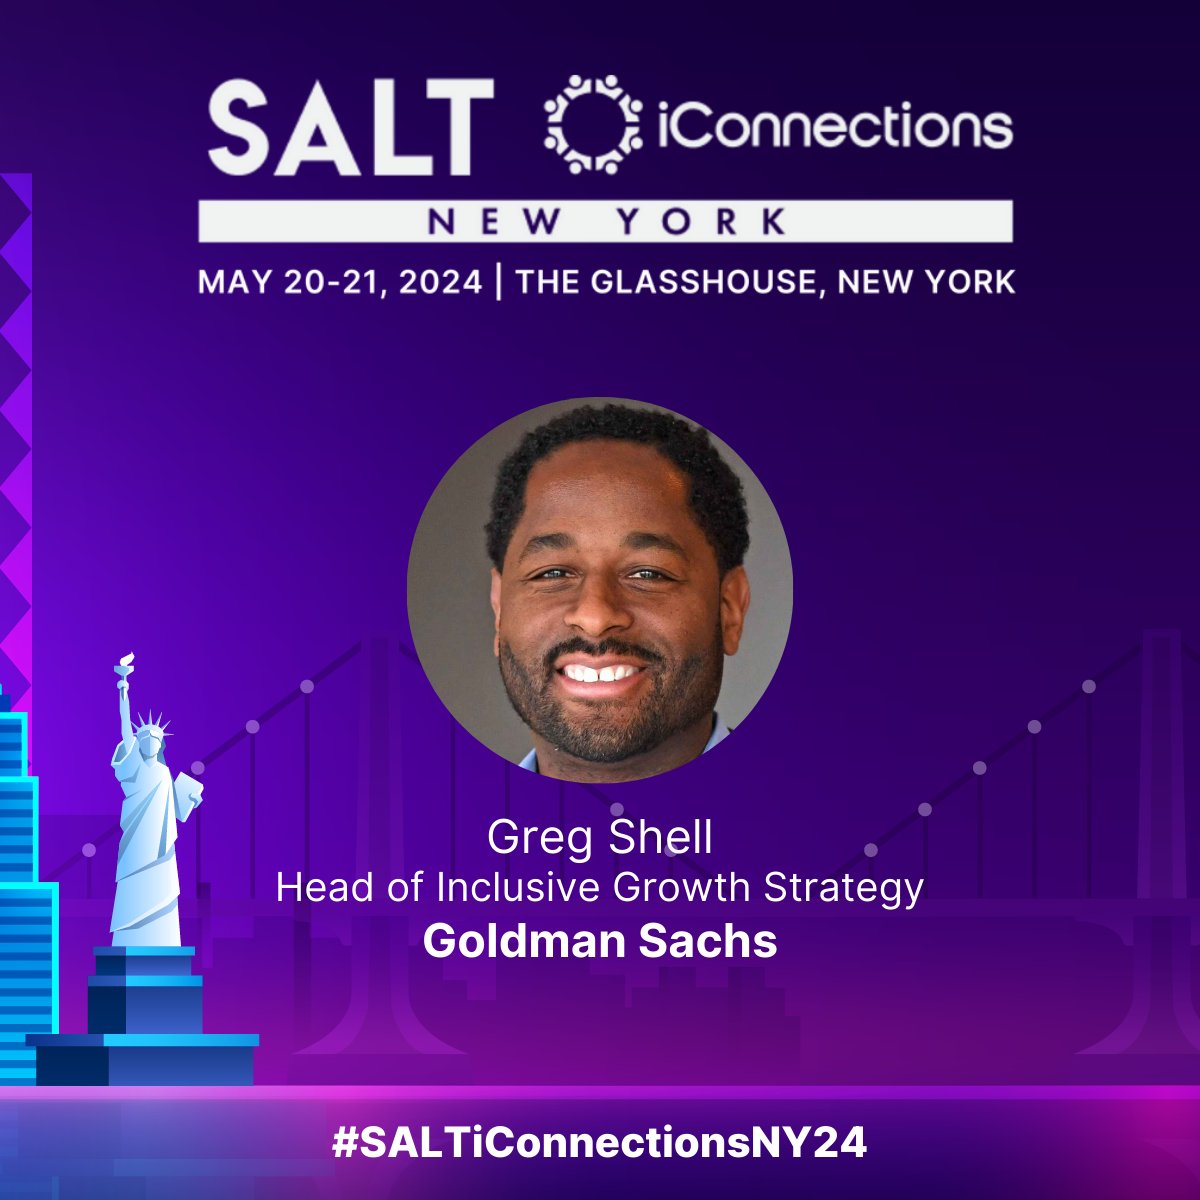 SALT iConnections New York 24 Speaker Announcement! Greg Shell, Head of Inclusive Growth Strategy | Goldman Sachs Join us in welcoming Greg Shell and Goldman Sachs to #SALTiConnectionsNY! Lean more - iconnections.io/salt-iconnecti…